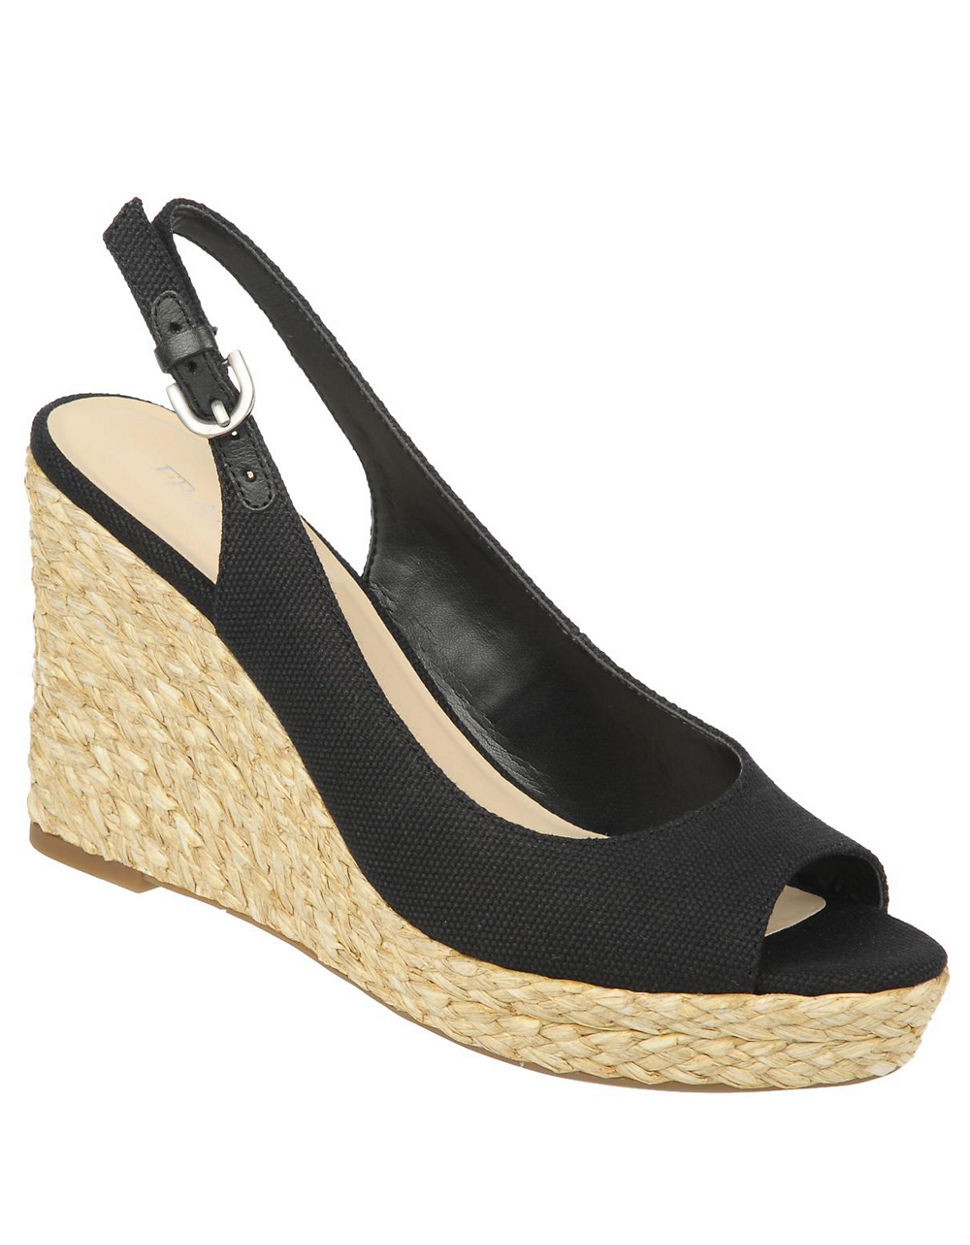 Franco Sarto Rory Canvas Slingback Wedge Sandals in Black | Lyst